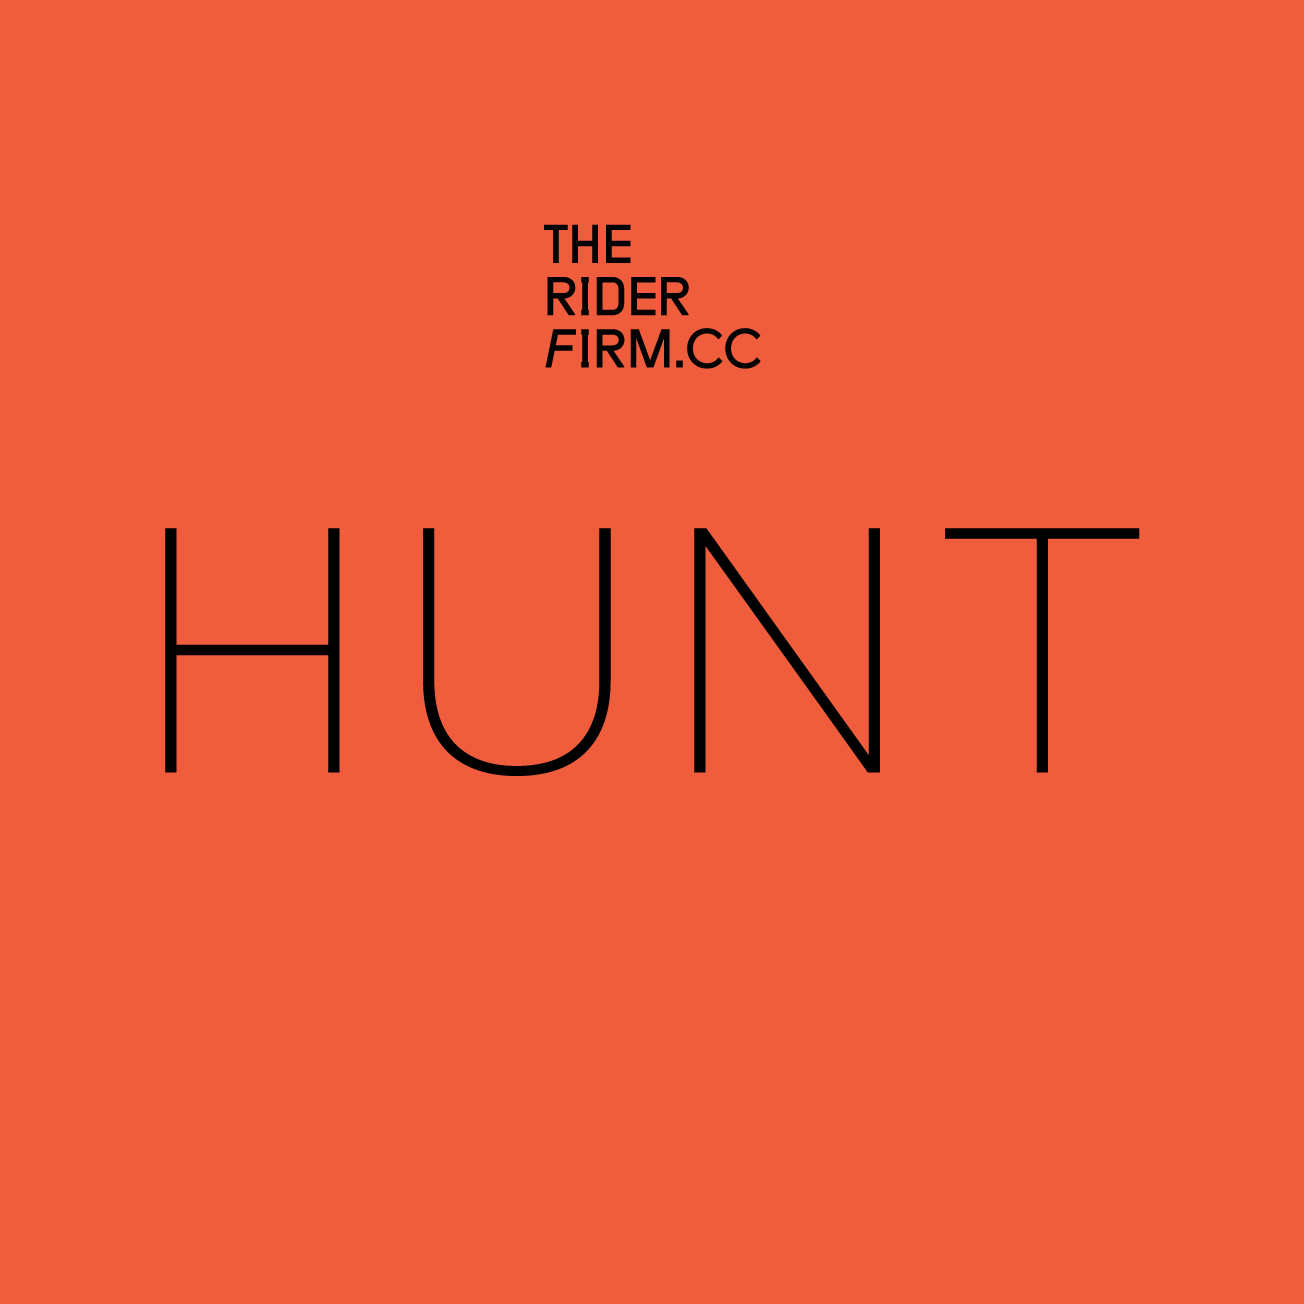 Club Image for HUNT WINTER